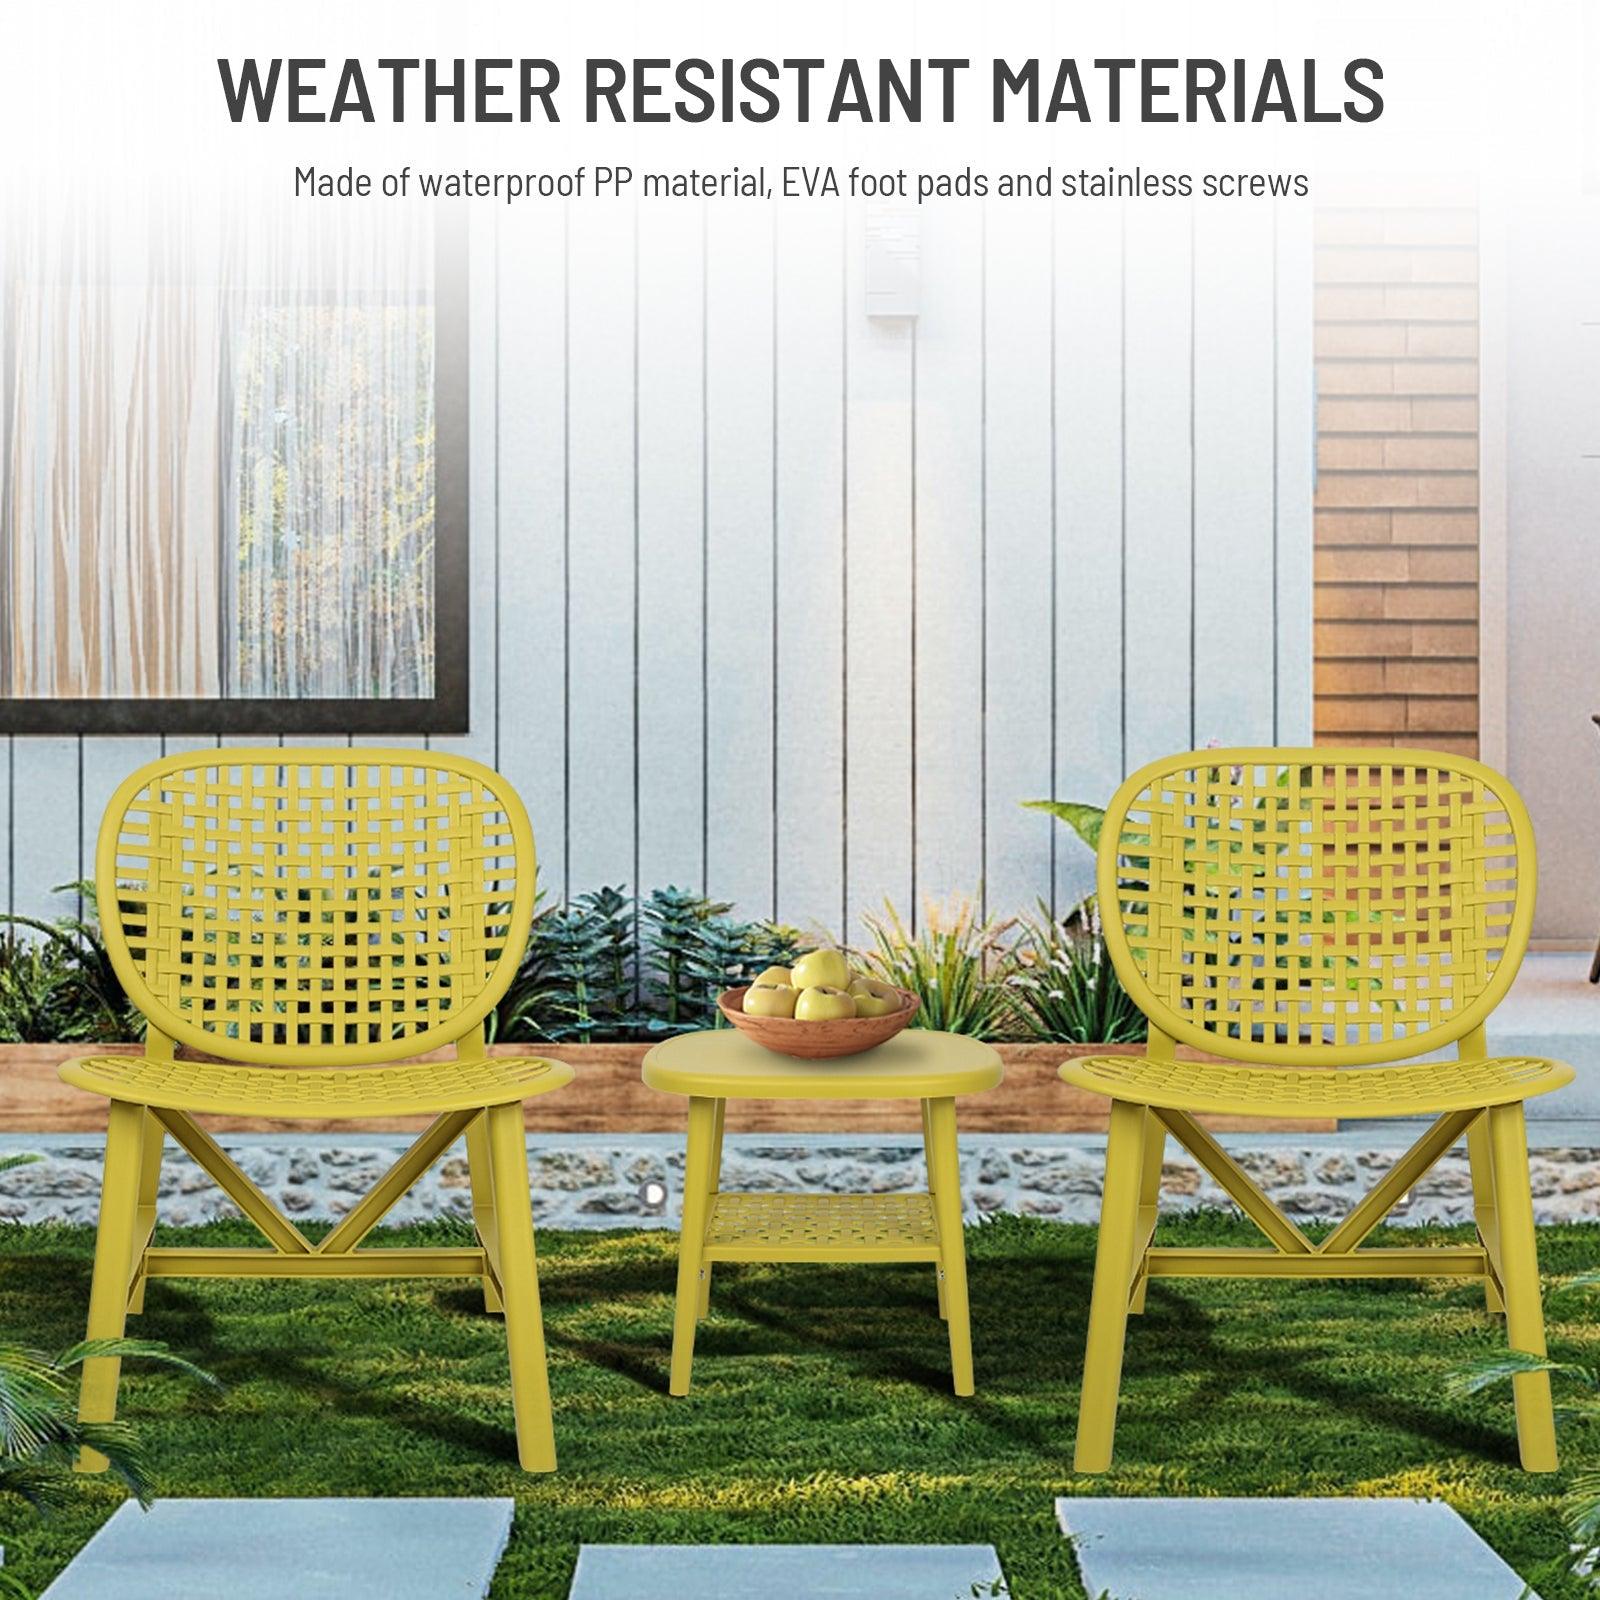 3 Pieces Hollow Design Patio Table Chair Set All Weather Conversation Bistro Set Outdoor Coffee Table With Open Shelf And Lounge Chairs With Widened Seat For Balcony Garden Yard Yellow LamCham